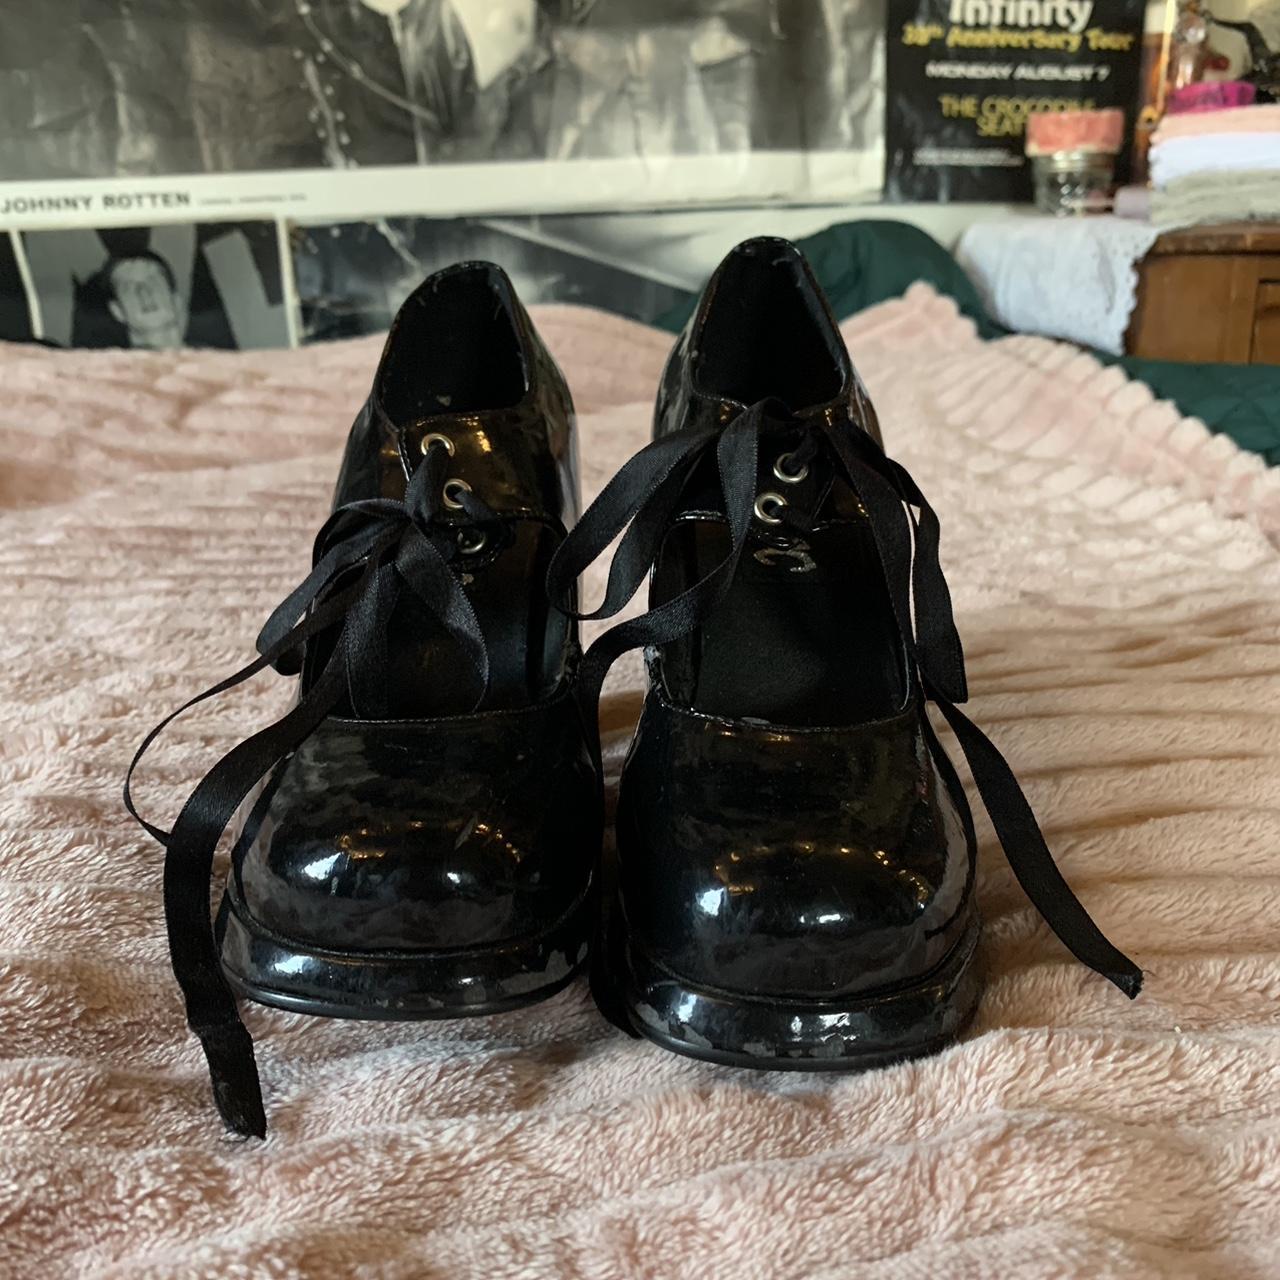 Hot Topic Women's Black Courts (2)